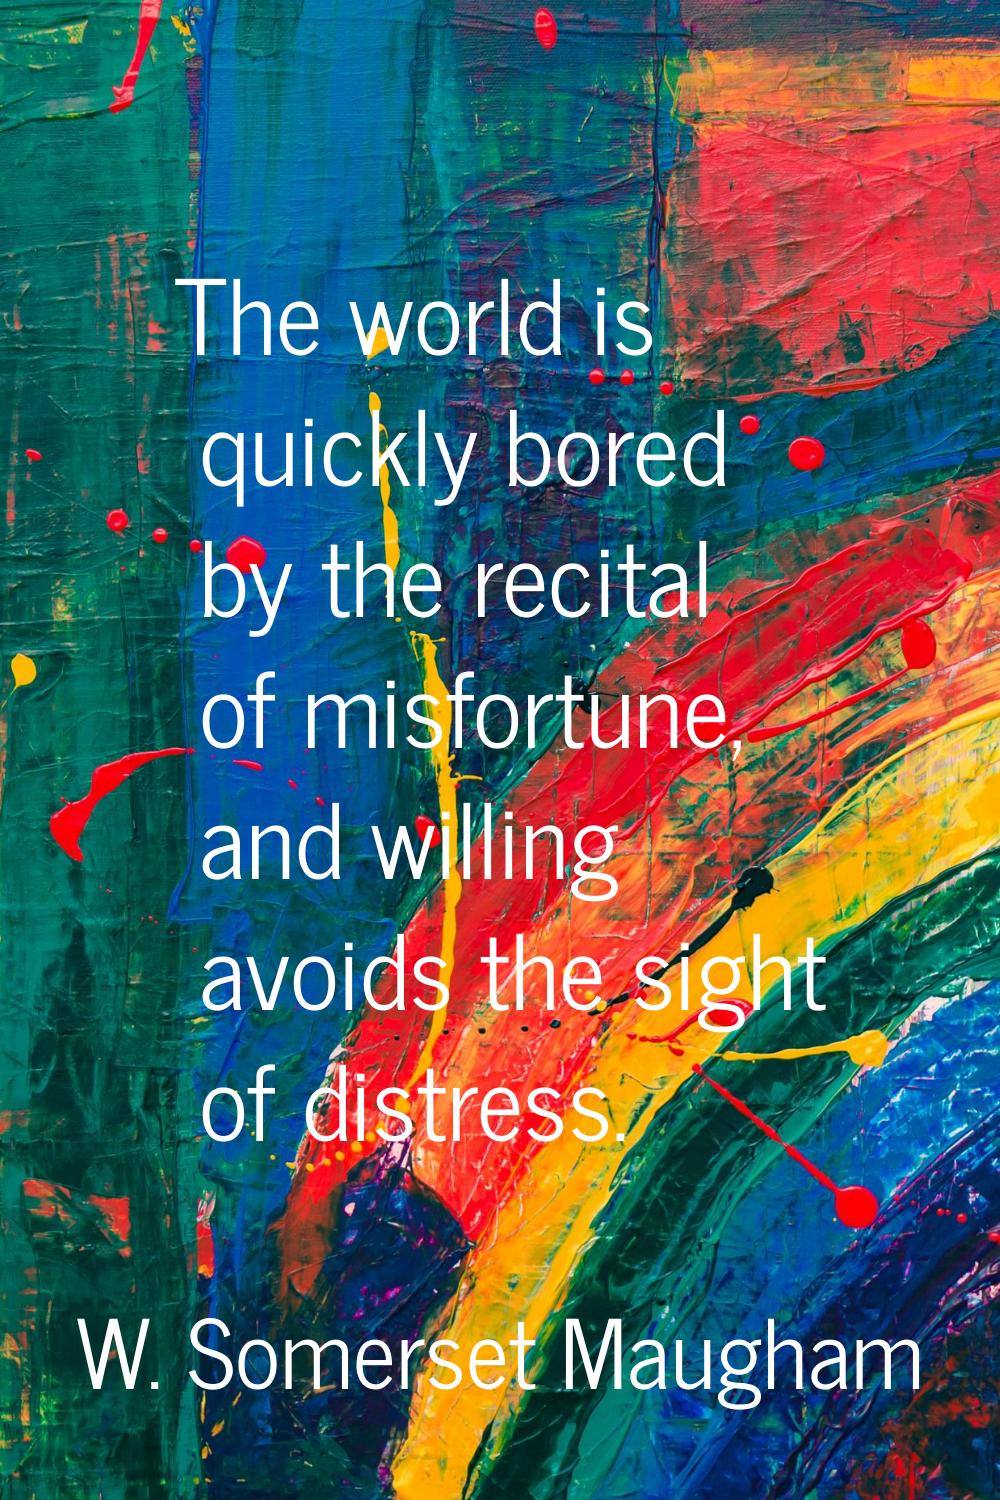 The world is quickly bored by the recital of misfortune, and willing avoids the sight of distress.